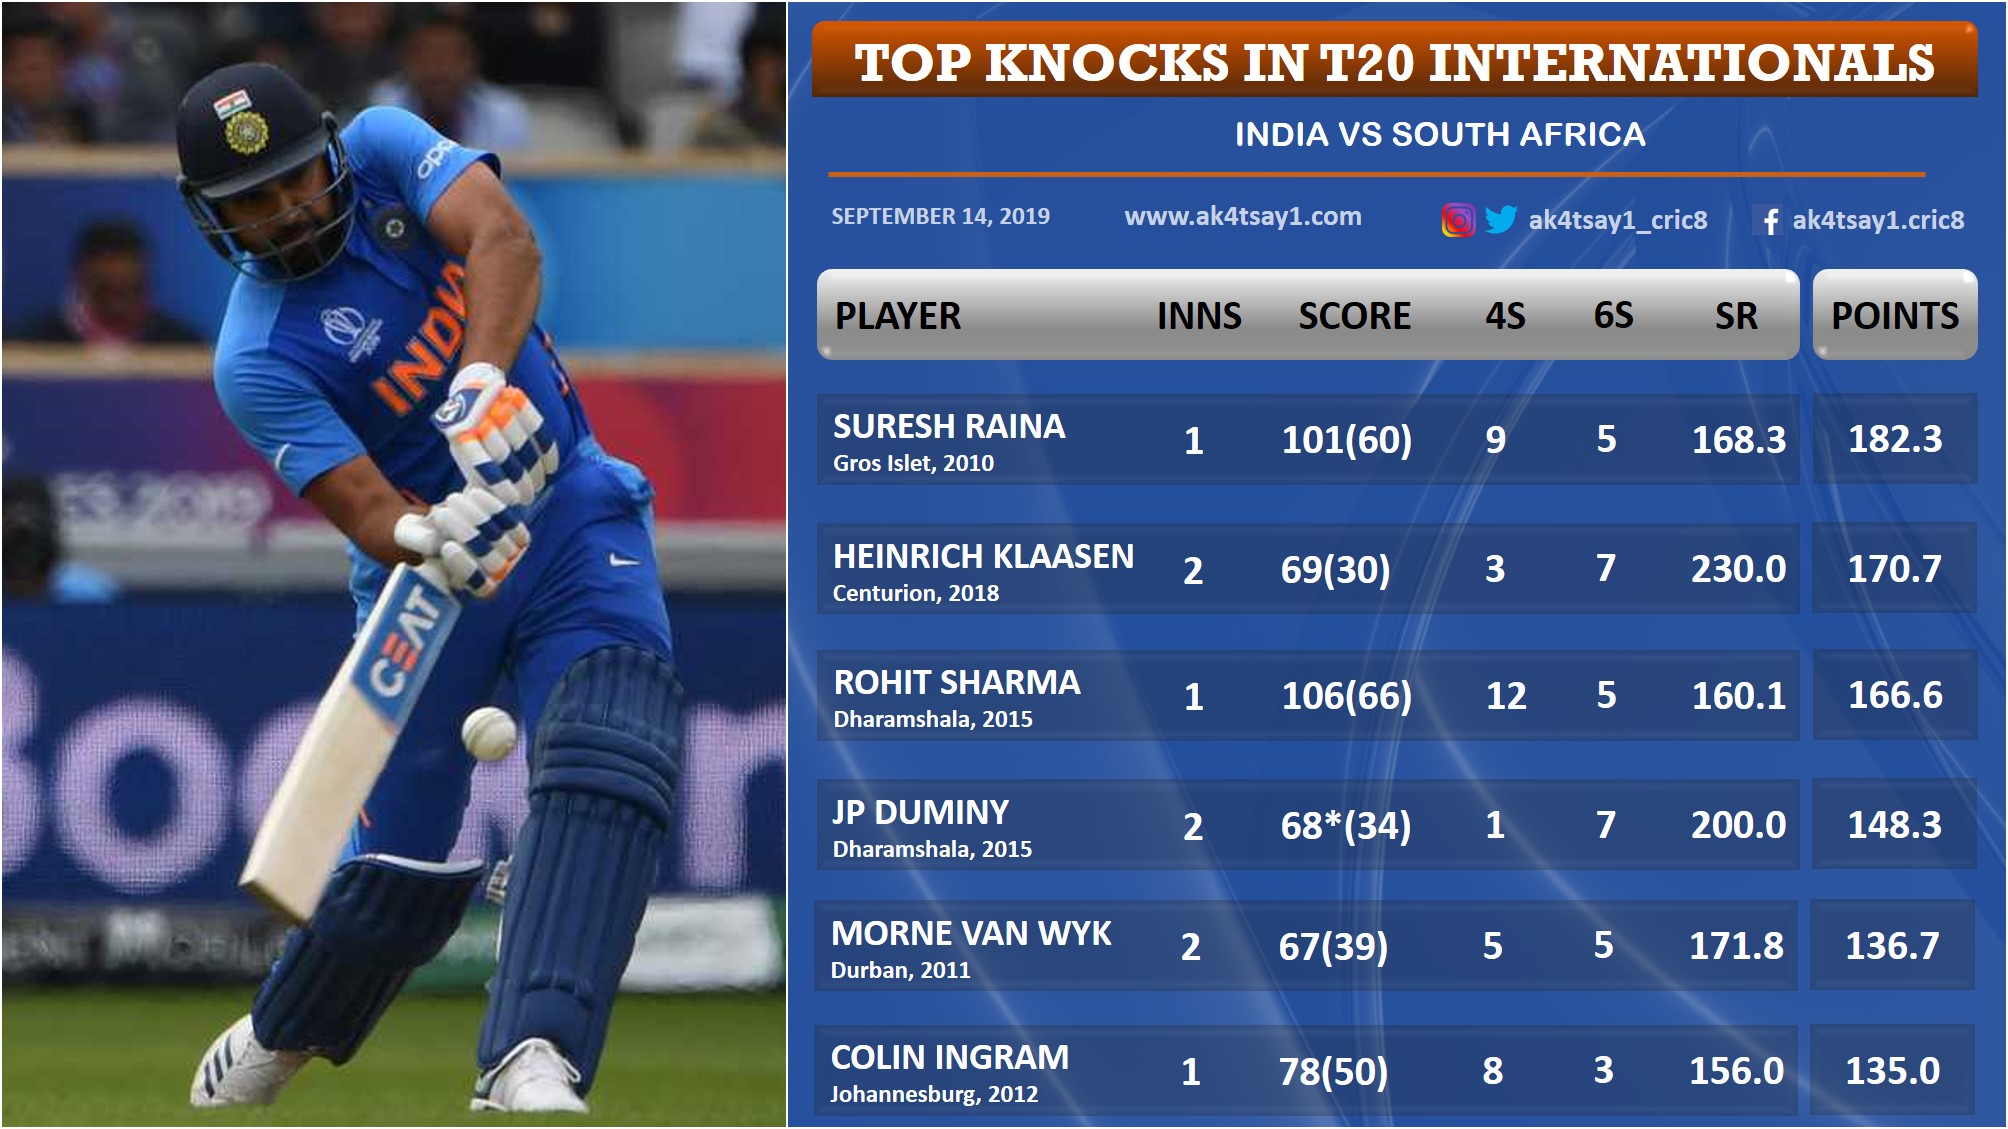 India vs South Africa Stats Wizard Top 5 knocks in T20 Internationals